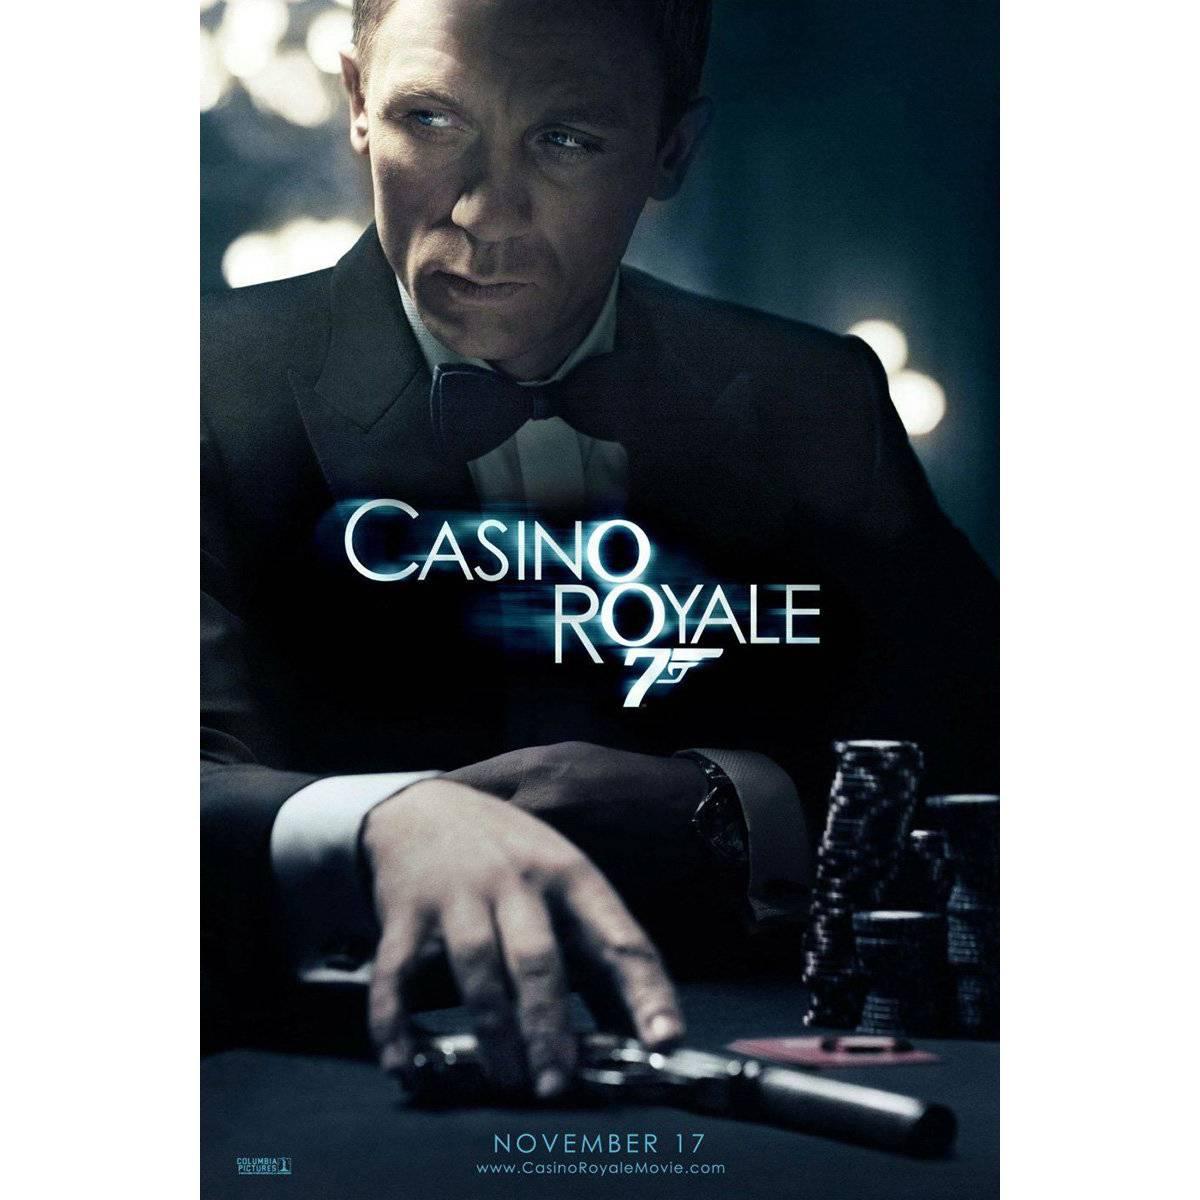 Vintage Movie Film Poster Home Wall Art Print A4,A3,A2,A1 CASINO ROYALE 5 